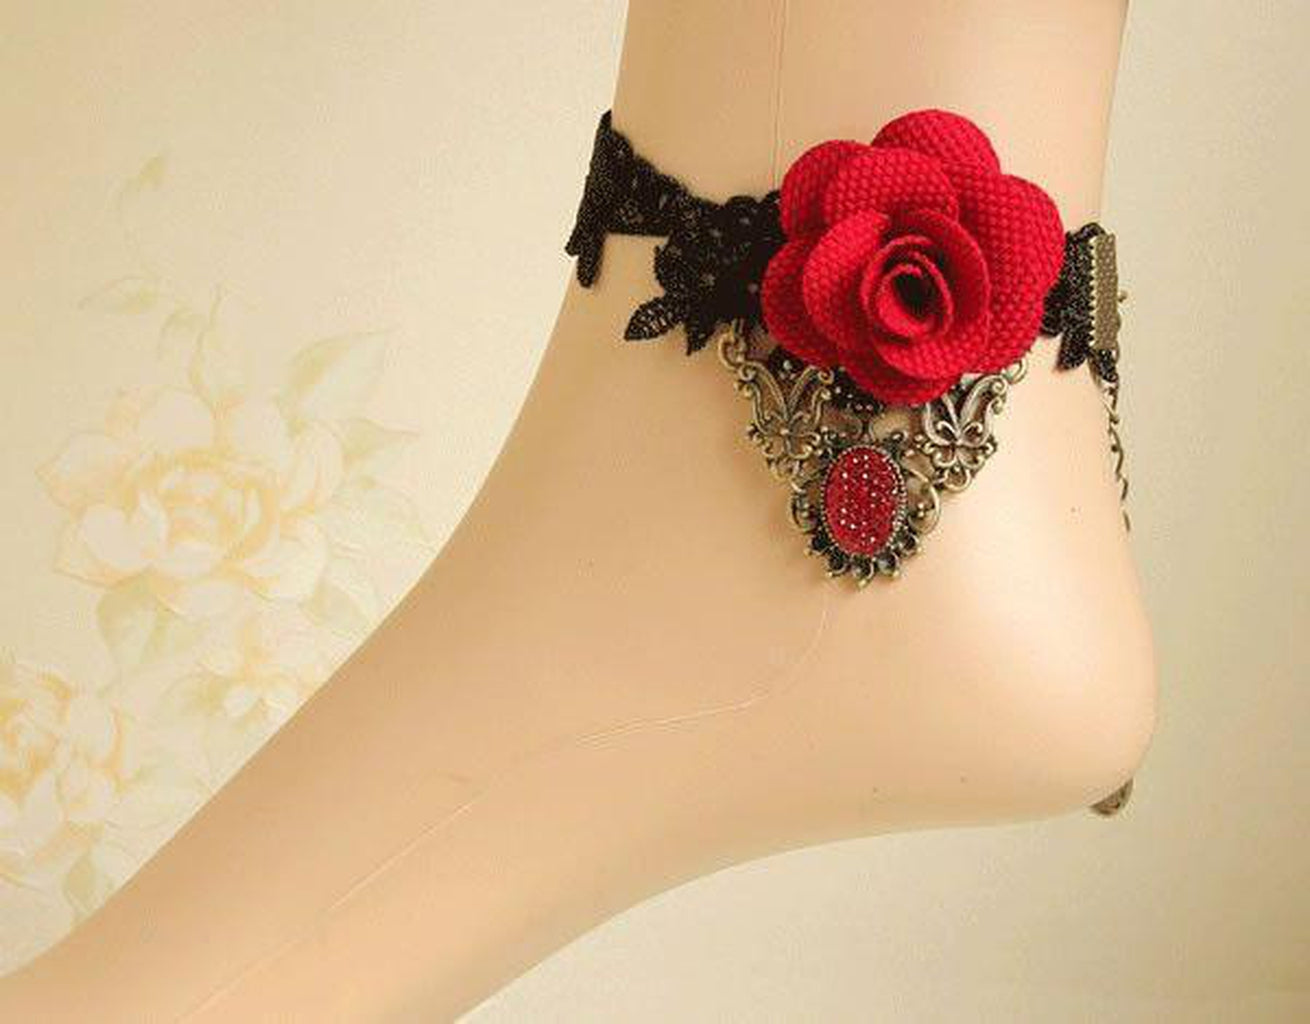 Goth Anklet - Lace With Rose-Badboy-Dark Fashion Clothing